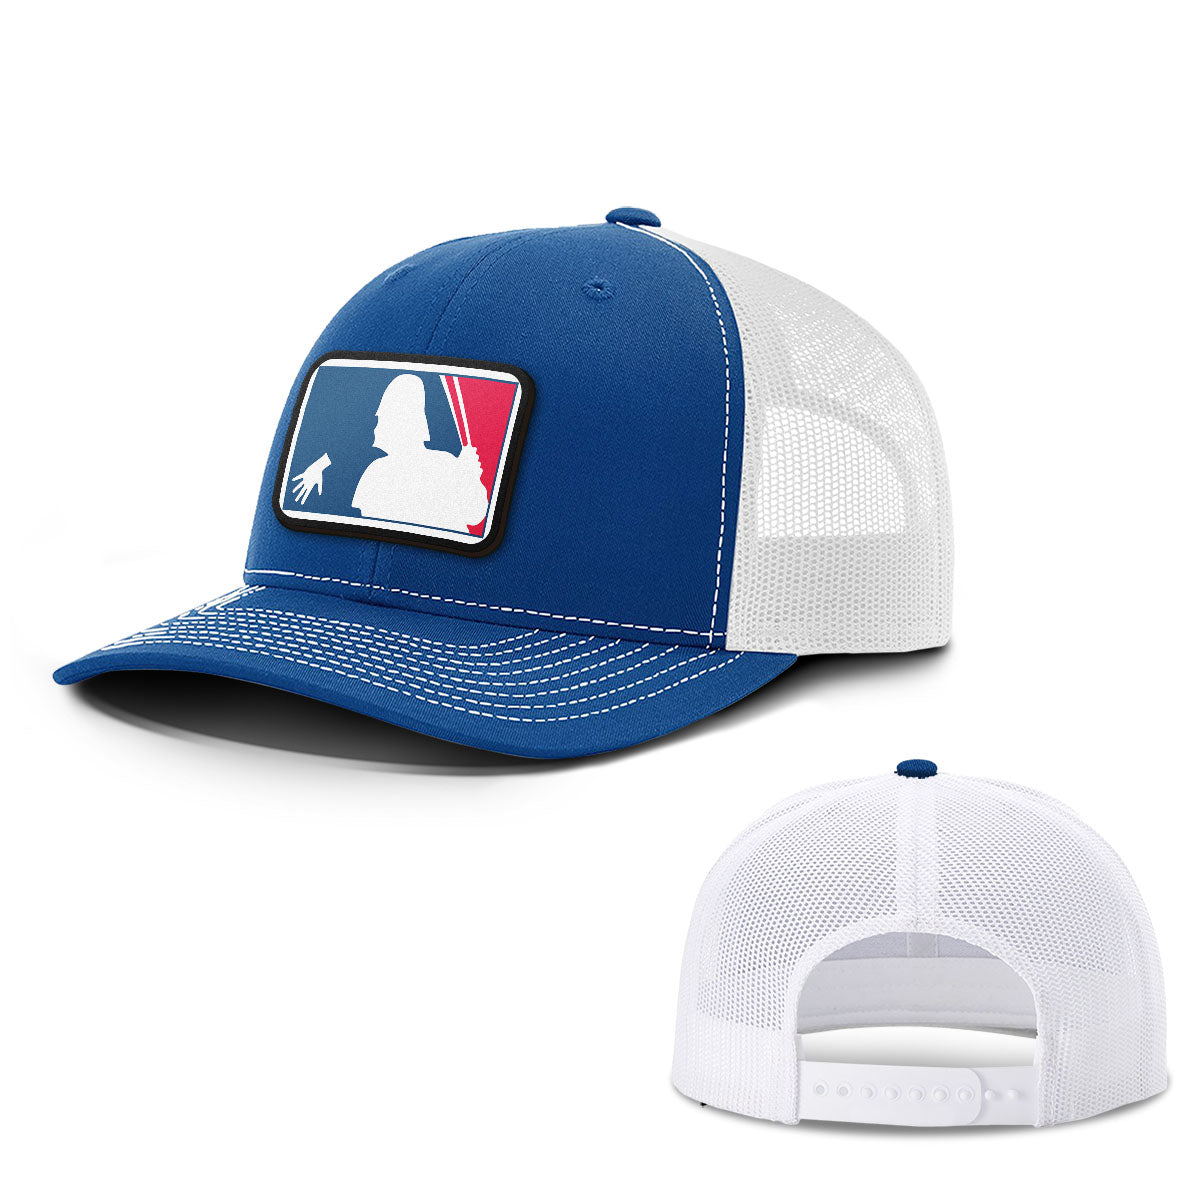 Funny Baseball Patch Hats - BustedTees.com